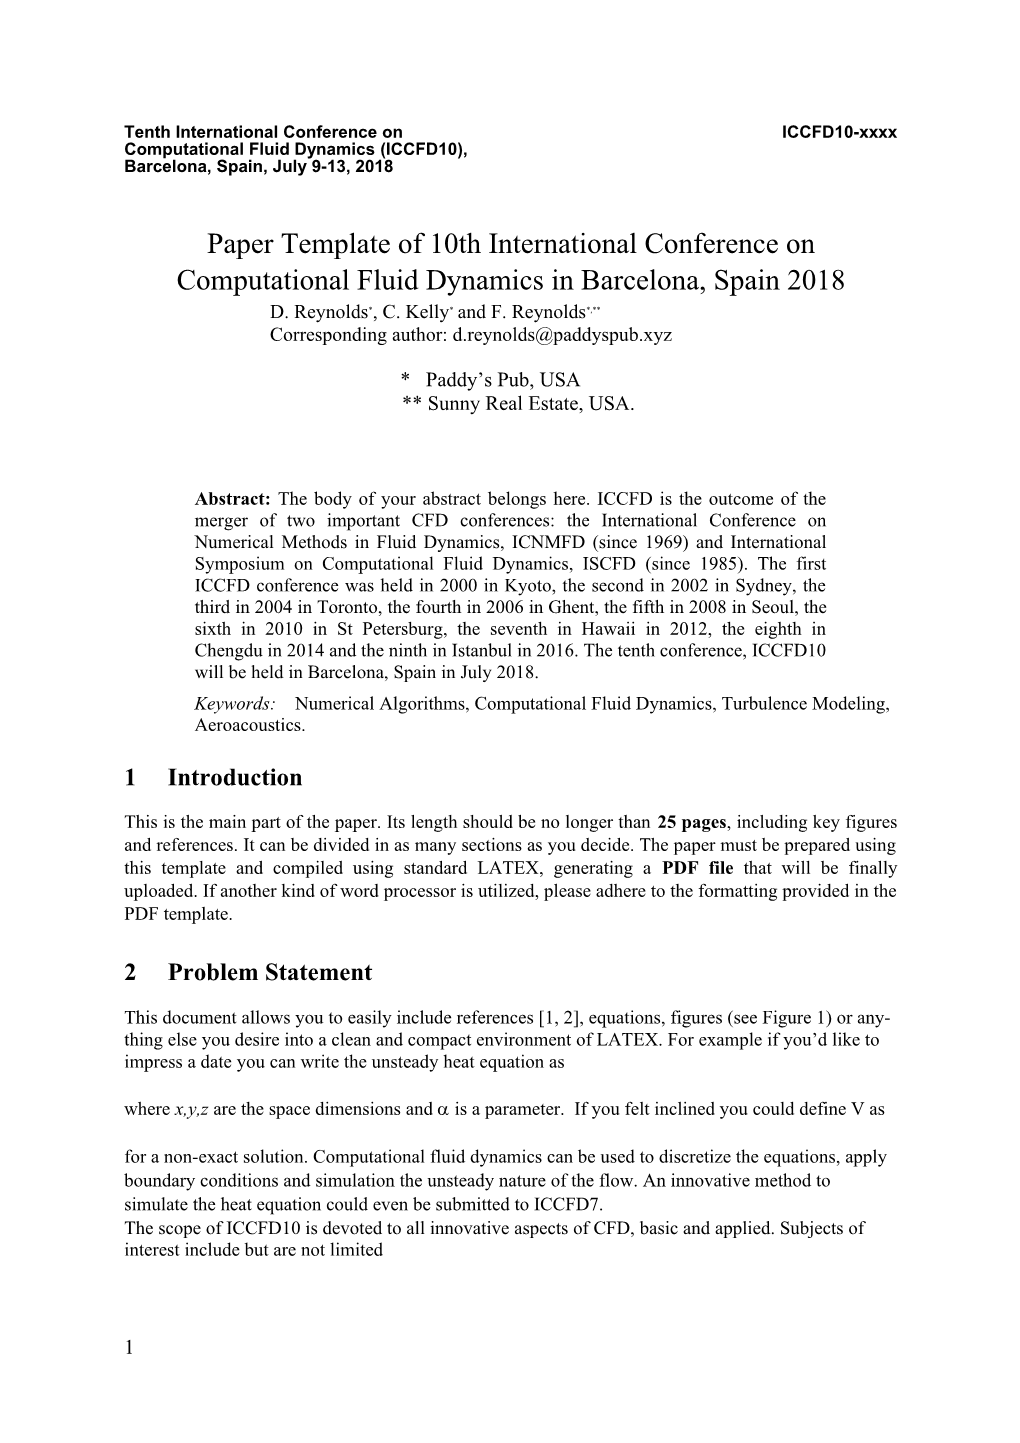 Abstract Template of Parallel CFD International Conference in Barcelona, Spain, During